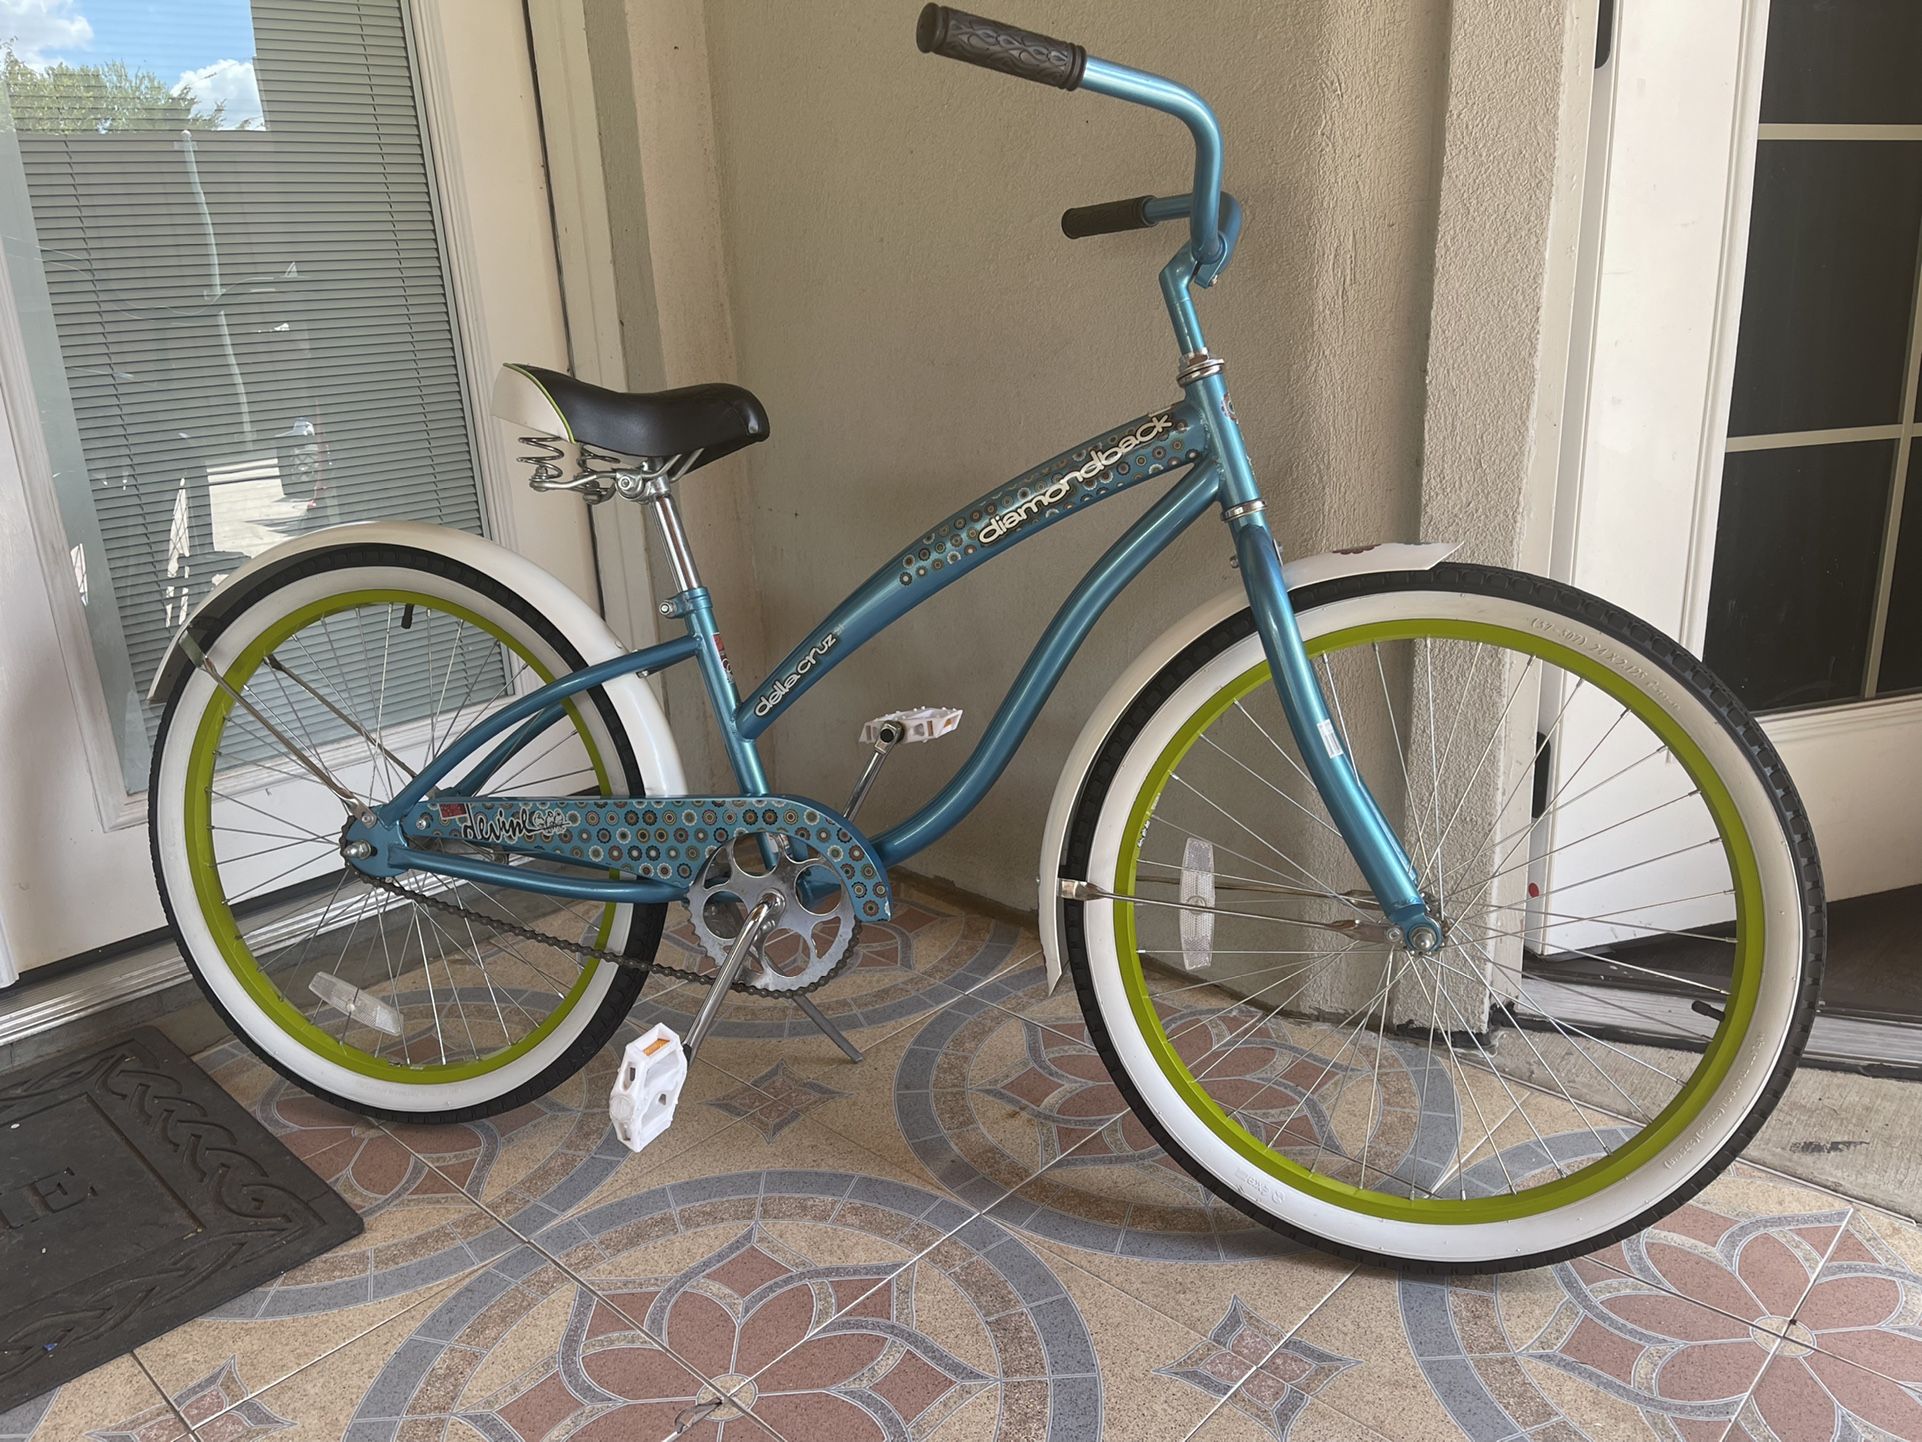 EXCELLENT CONDITION 24” TURQUOISE BIKE